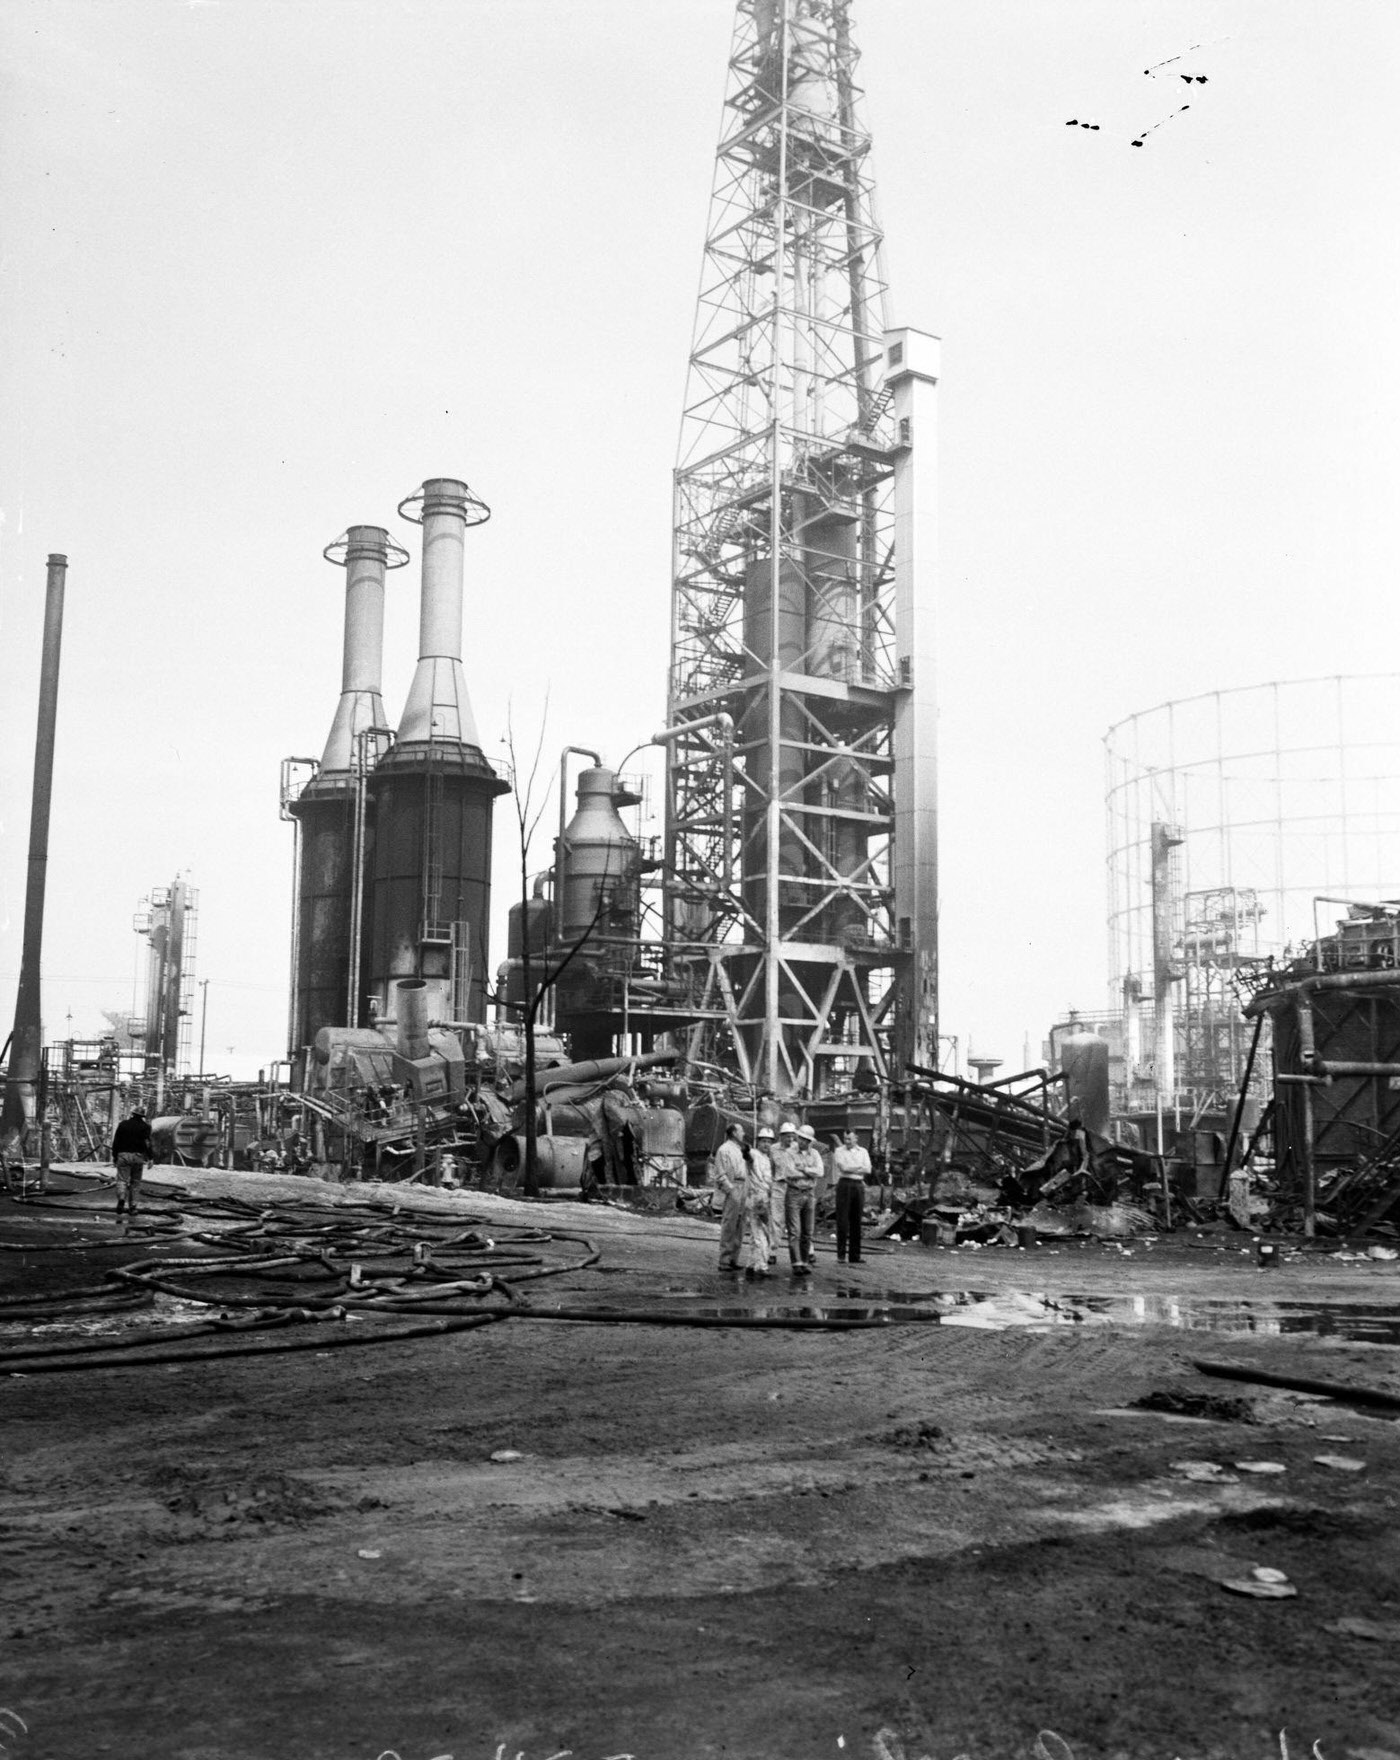 Hancock Oil Fire Clean-Up, Desolation of Plant Viewed from South, 1958